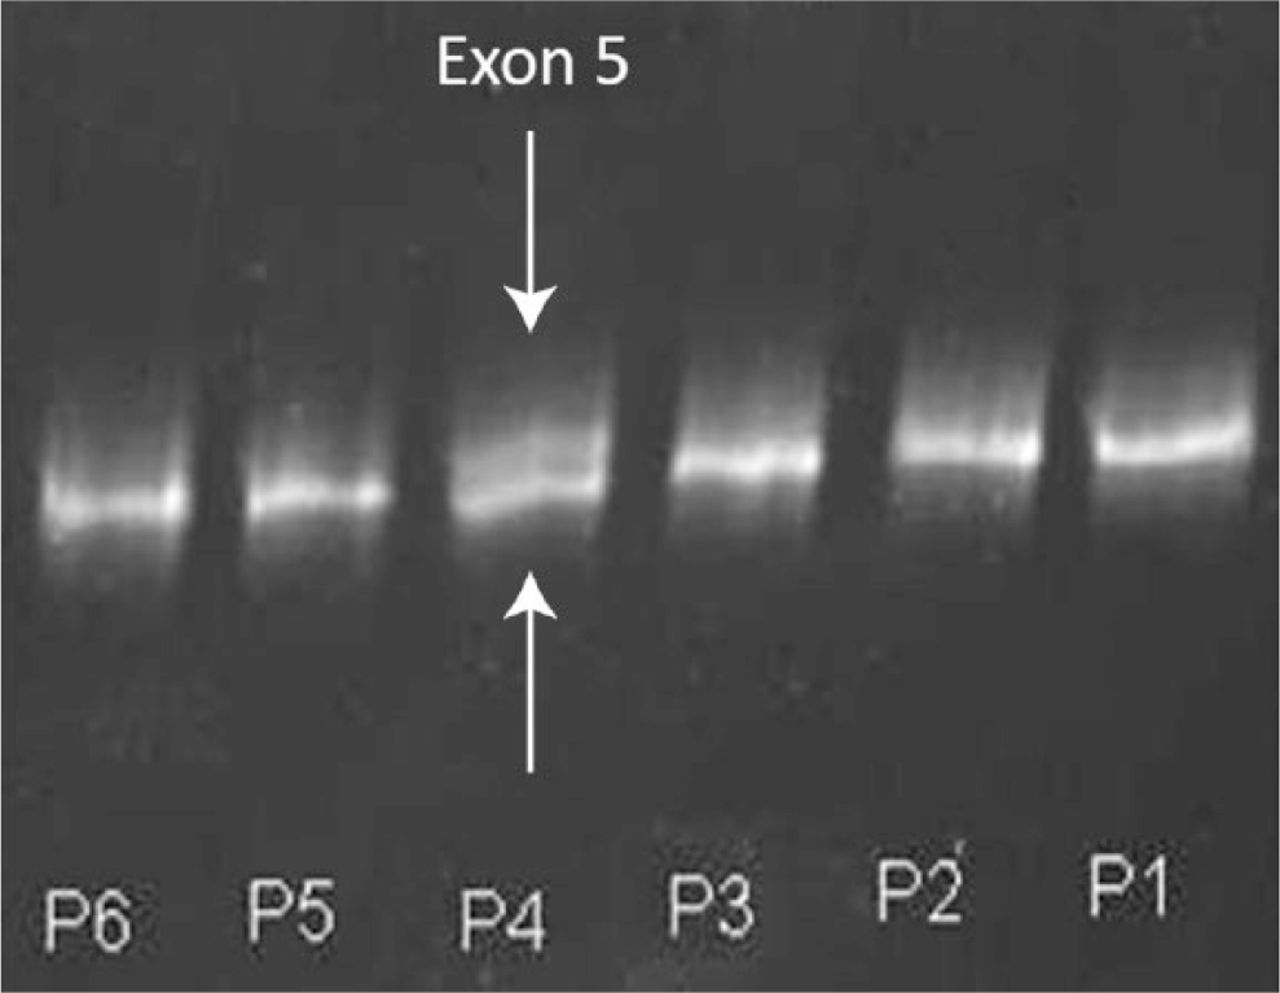 Fig. 3 
          Conformation-sensitive gel electrophoresis for six patients. The fourth patient (P4) shows a heteroduplex band indicated by the white arrow above the normal band of exon 5 (white arrow), indicating a mutation in the fifth exon of the WISP3 gene.
        